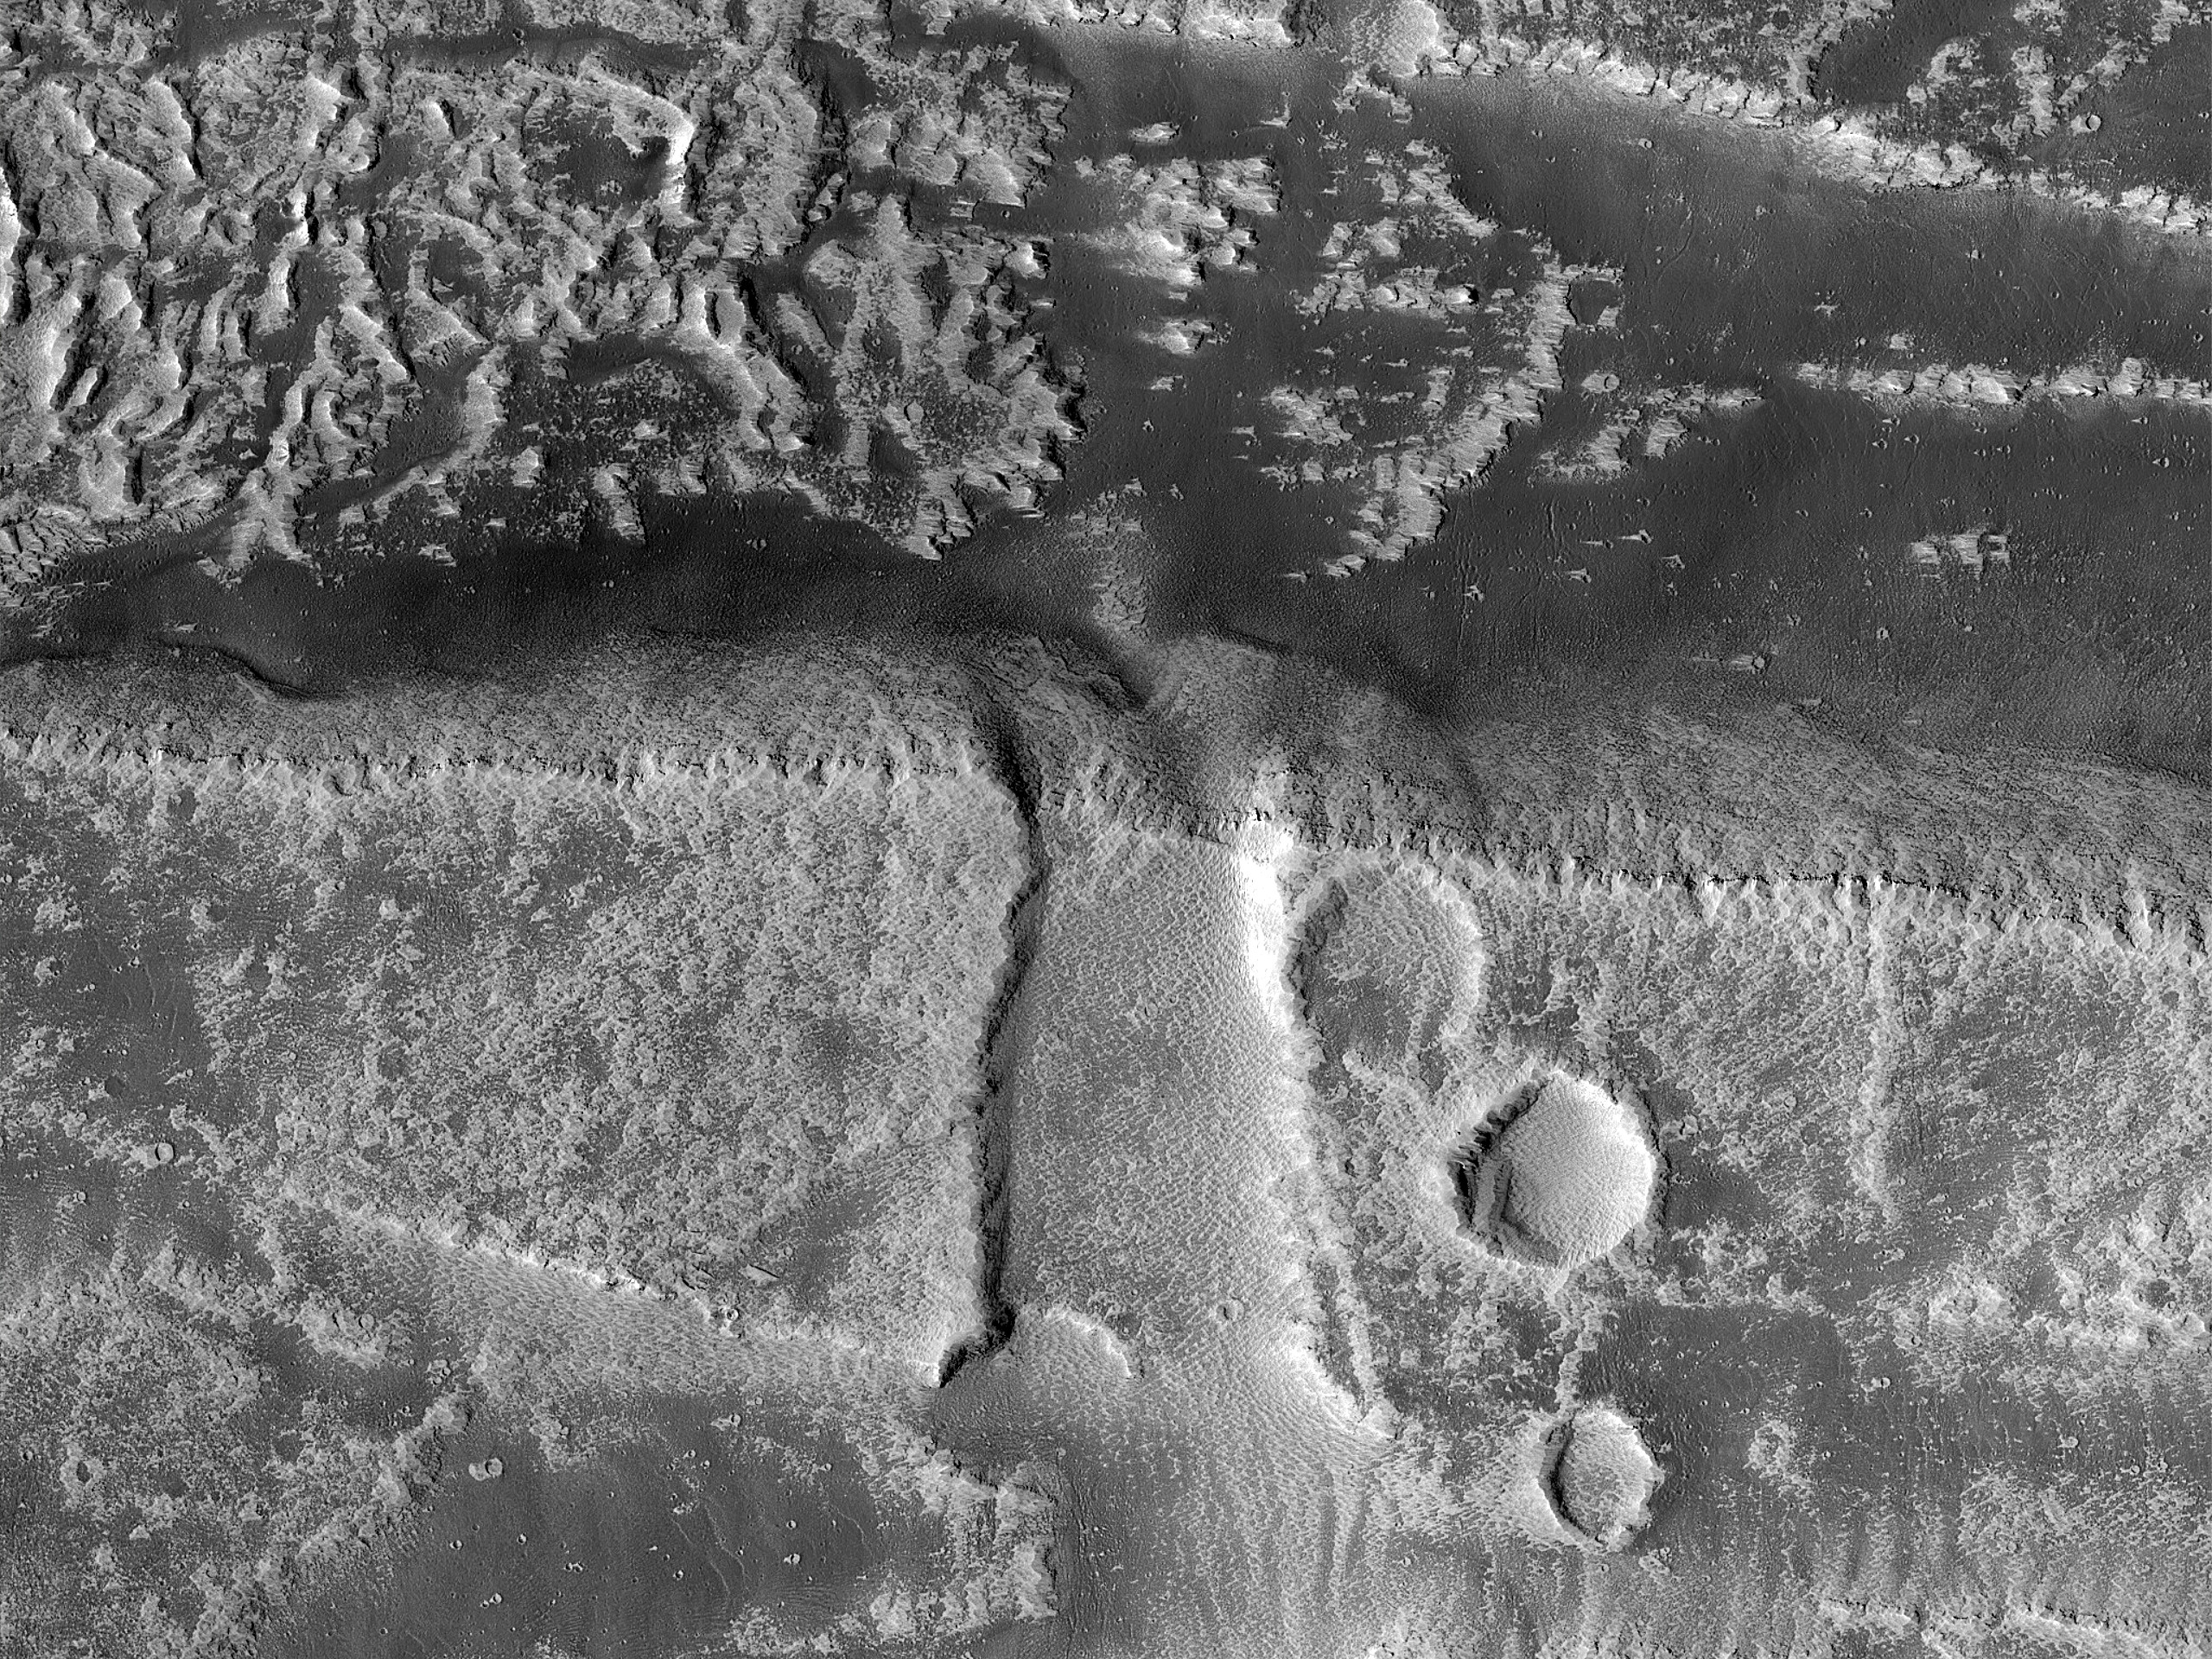 Contact between Distal Arsia Mons Lavas and Noctis Labyrinthus Grabens